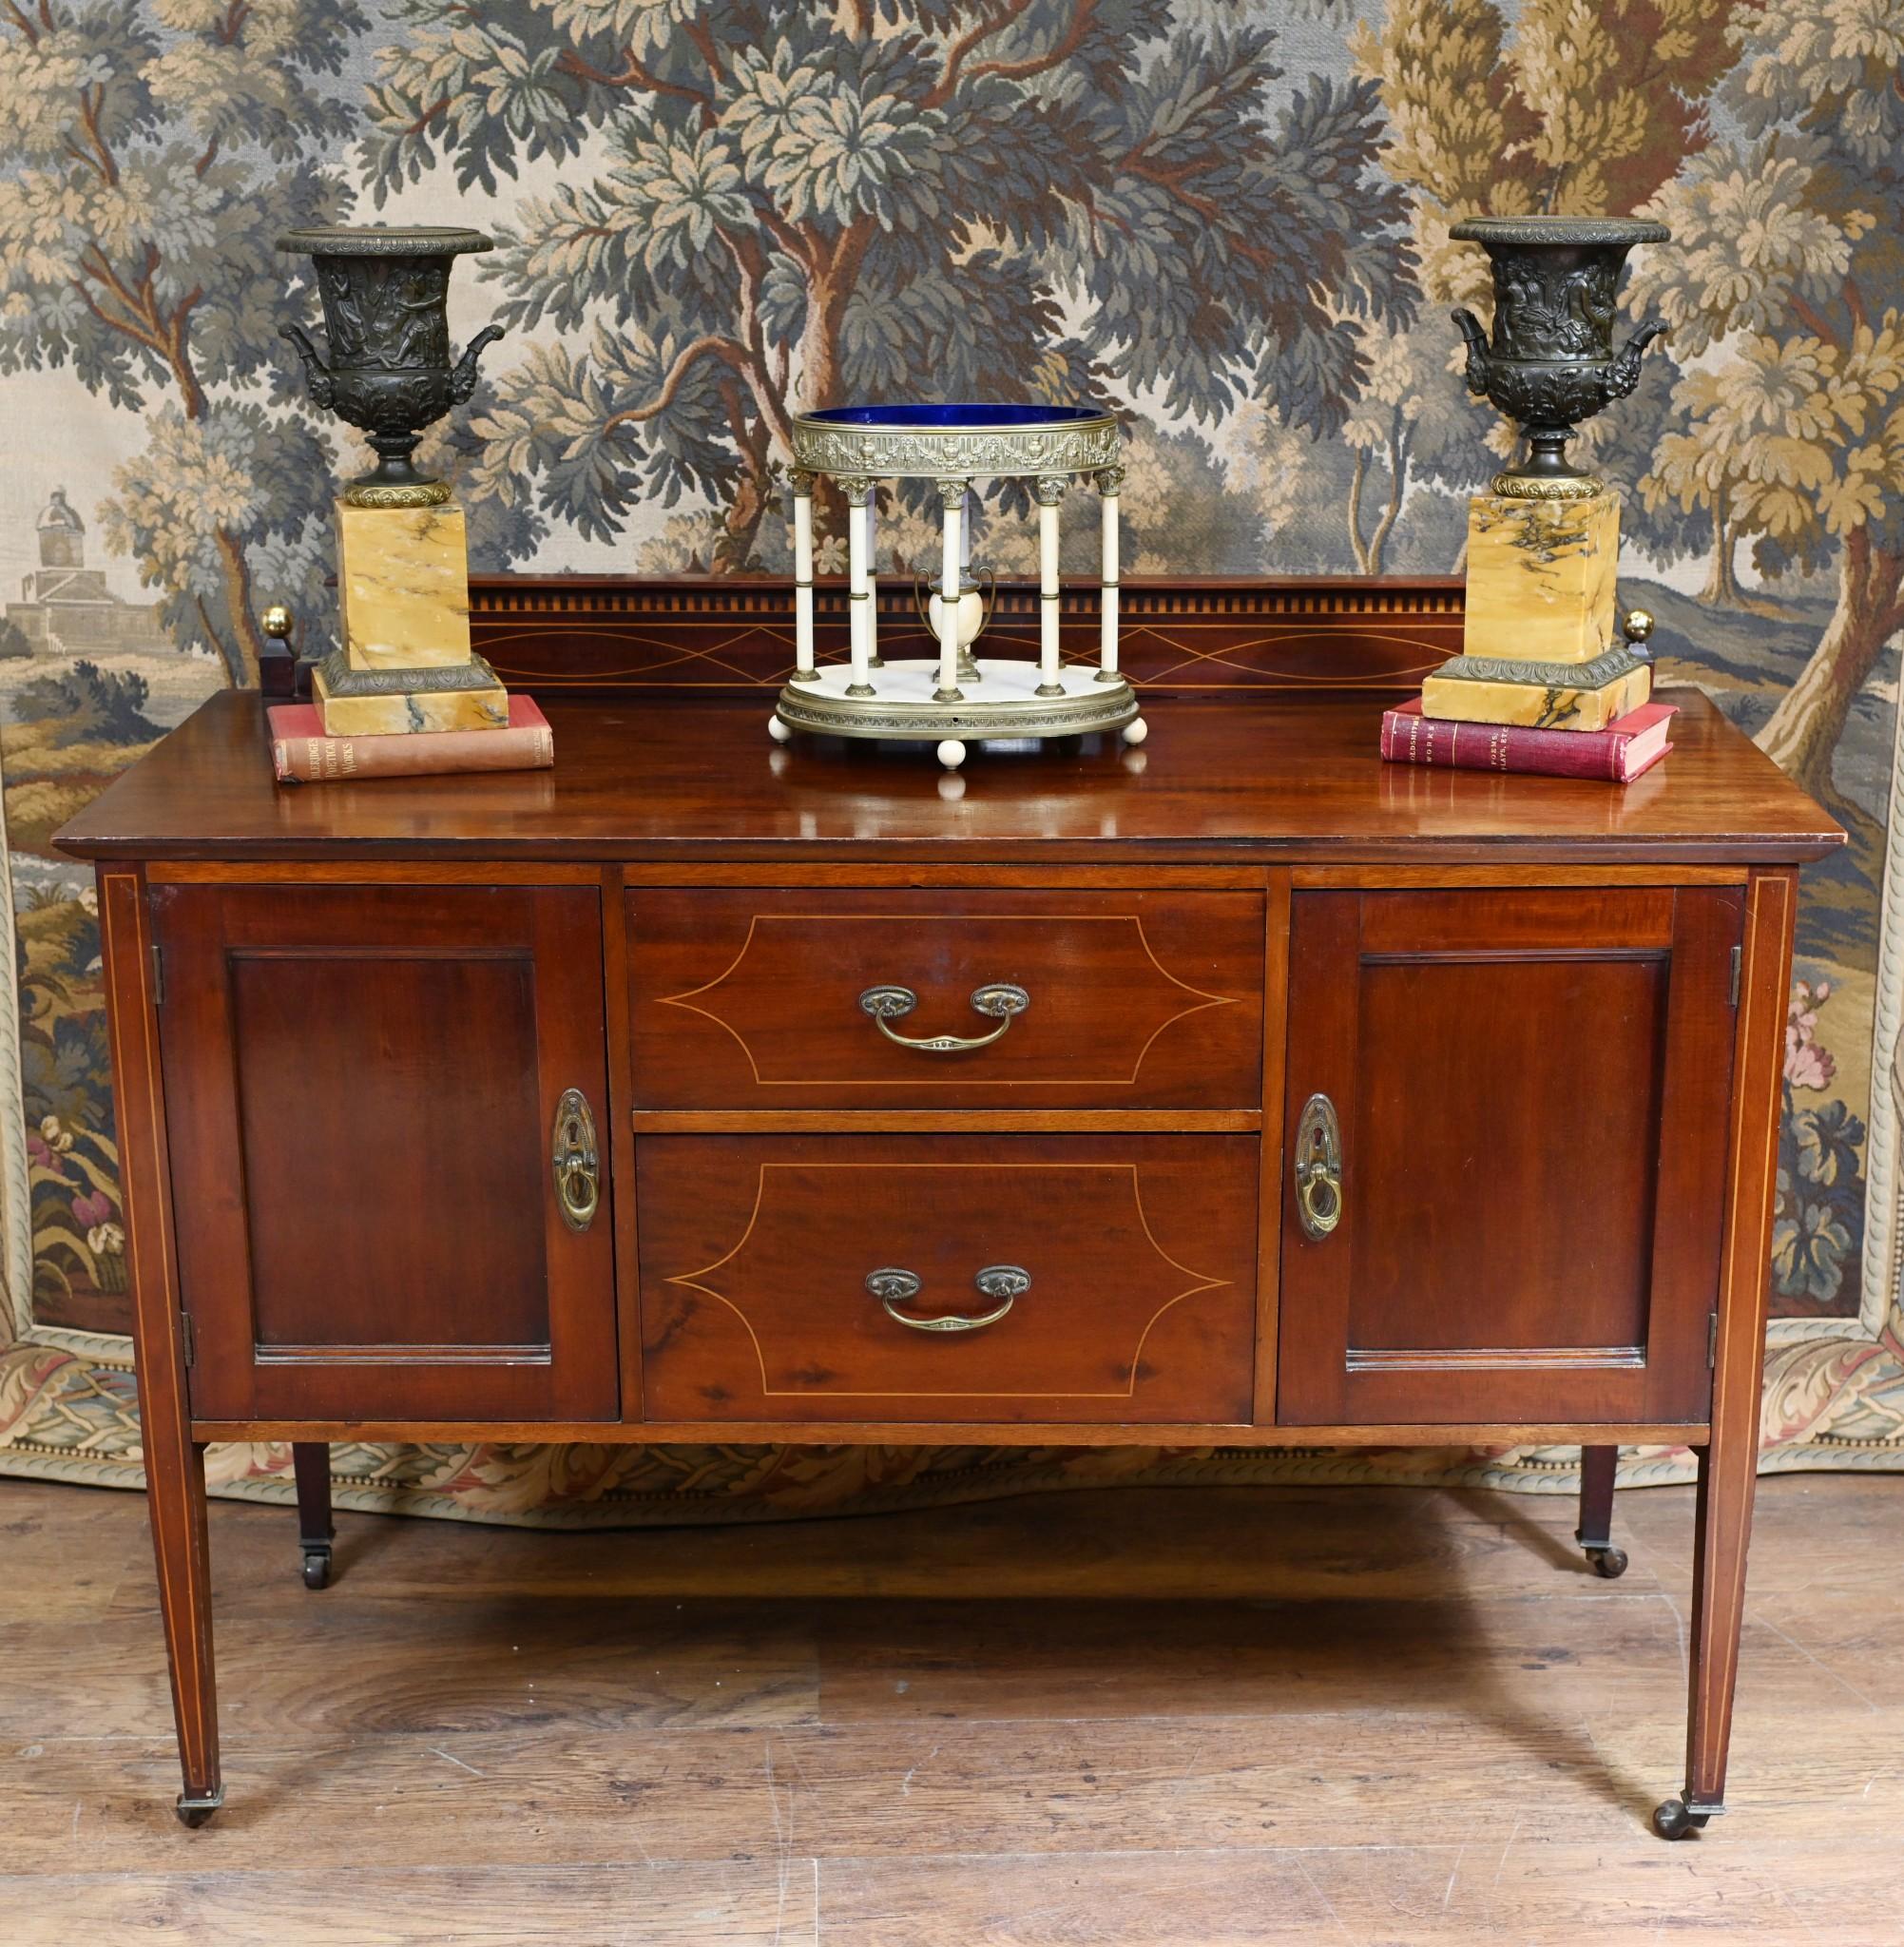 Edwardian small side board with string inlays circa 1910
Hand crafted from mahogany with Sheraton manner motifs in the inlay
Two drawers and two side cabinets so ample storage
Clean and stylish piece with tapered legs
Viewings available by